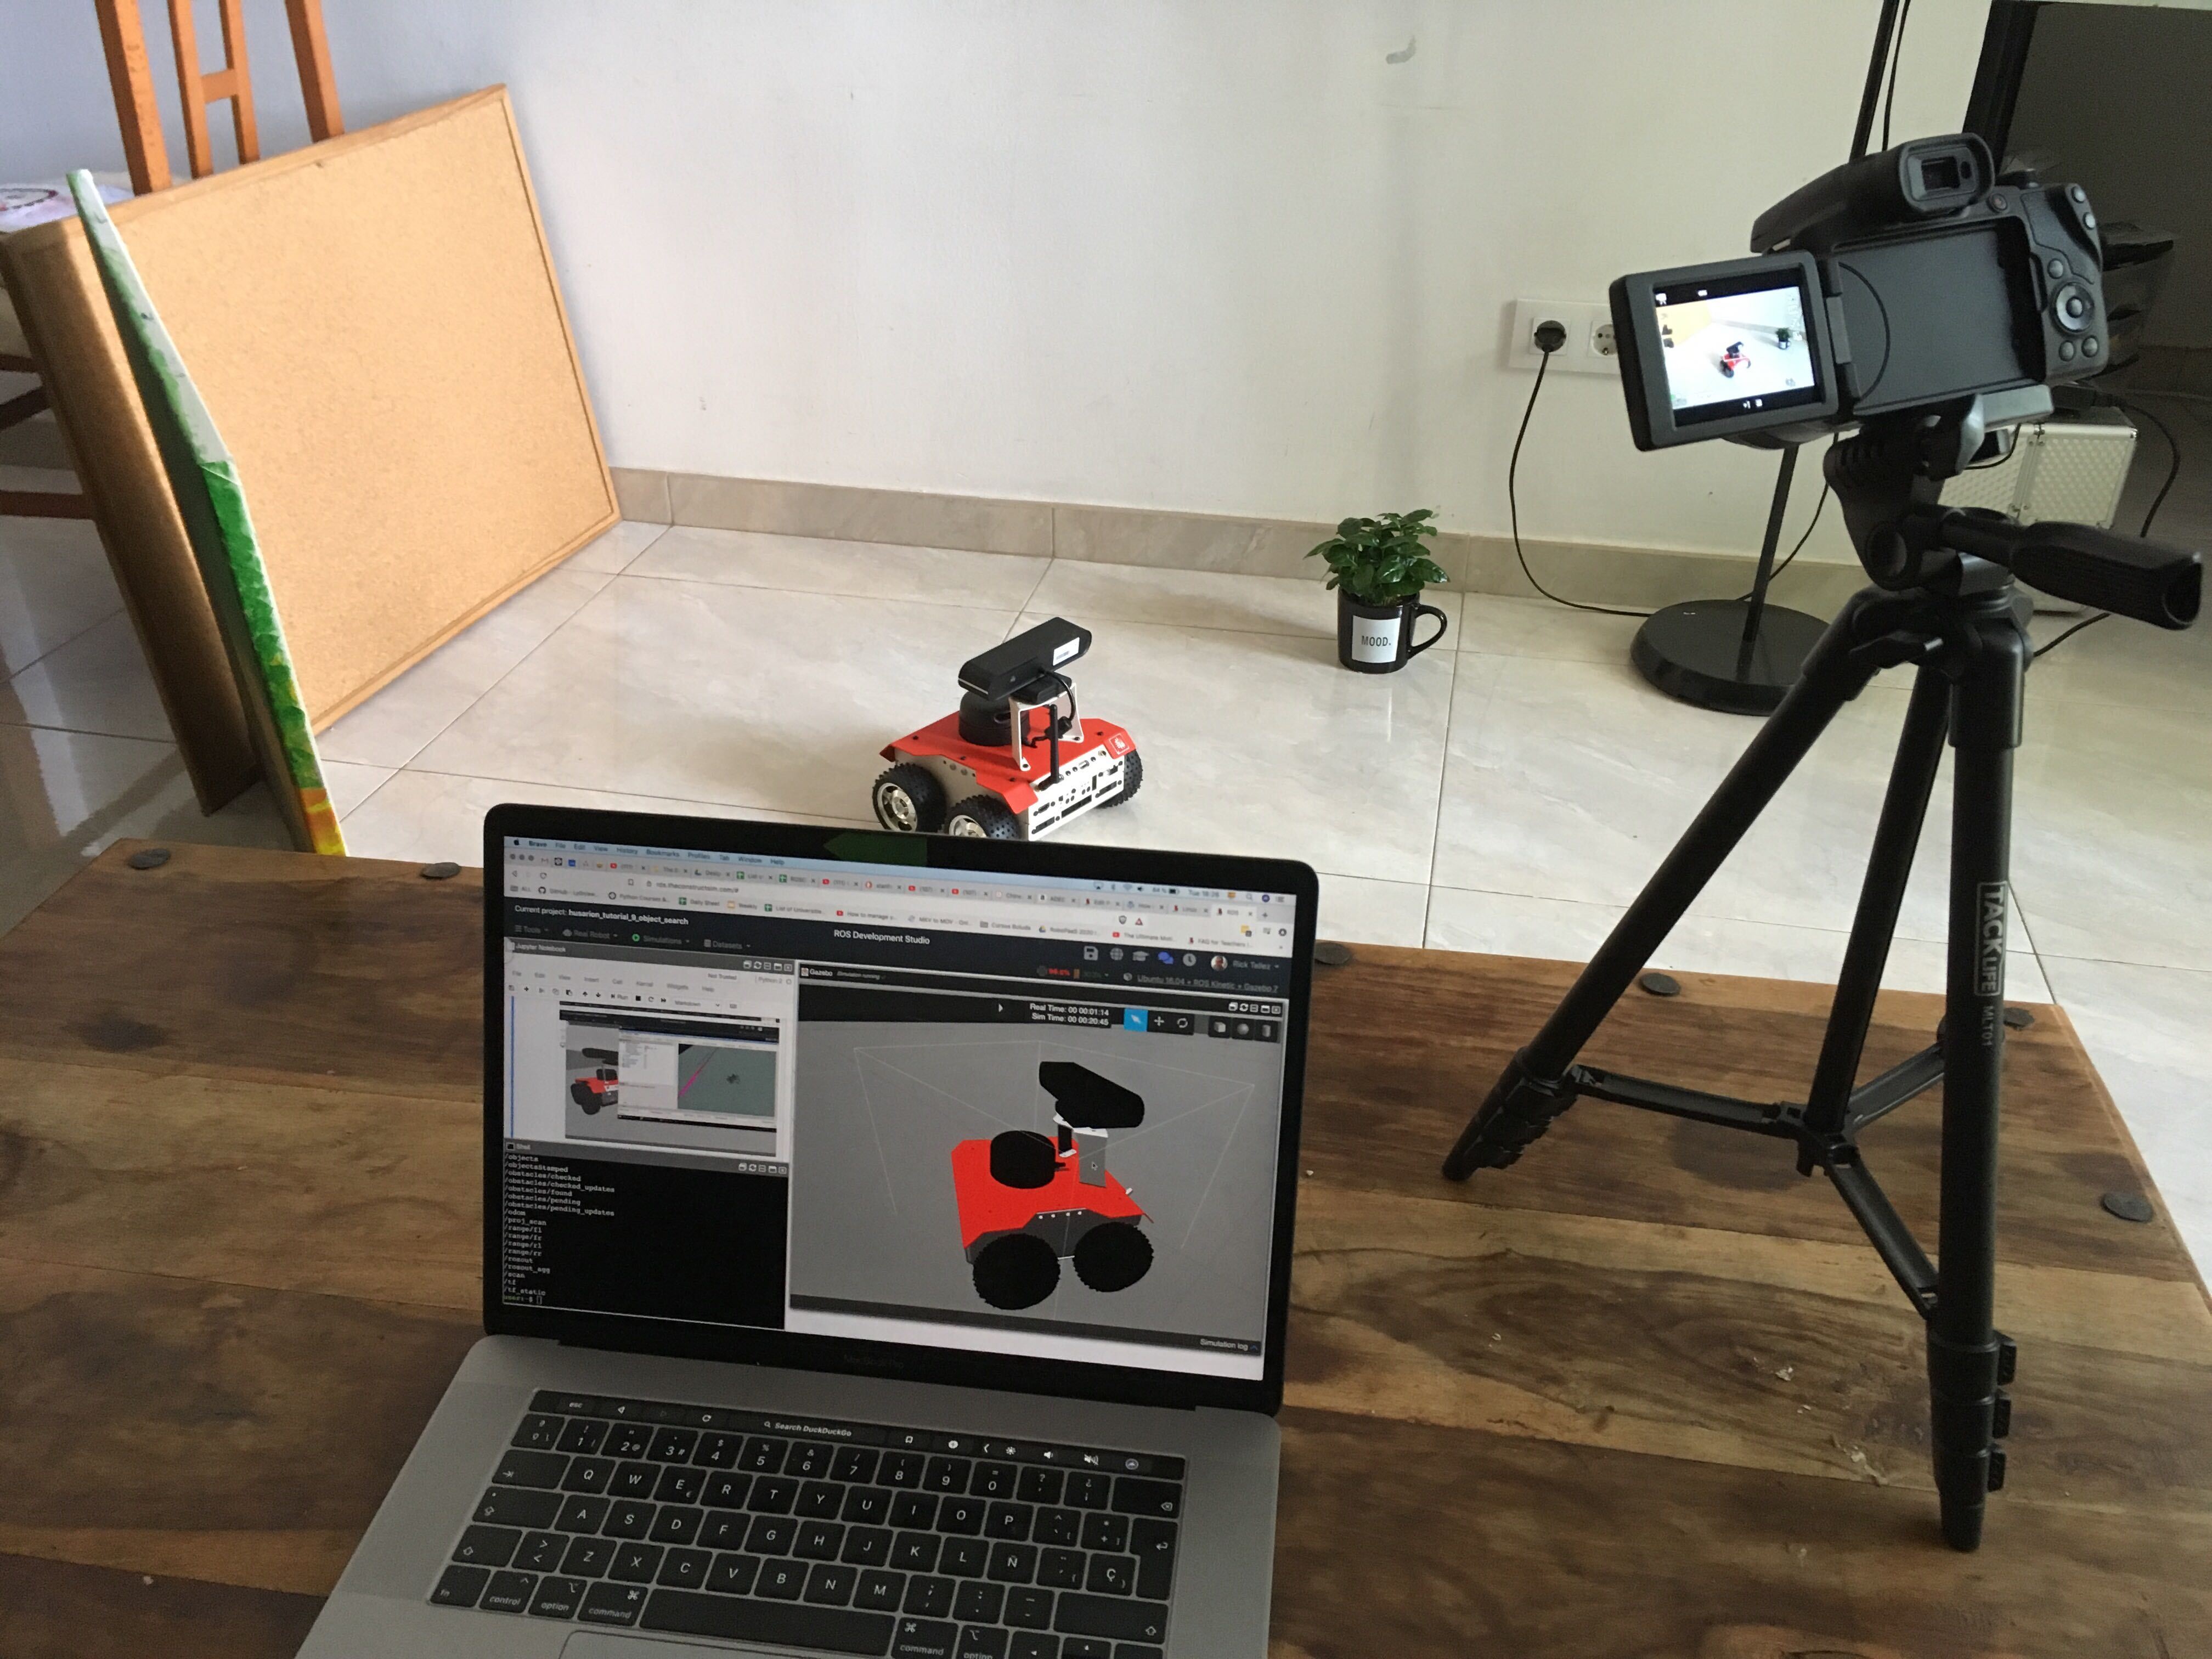 Teaching Robotics to University Students from Home